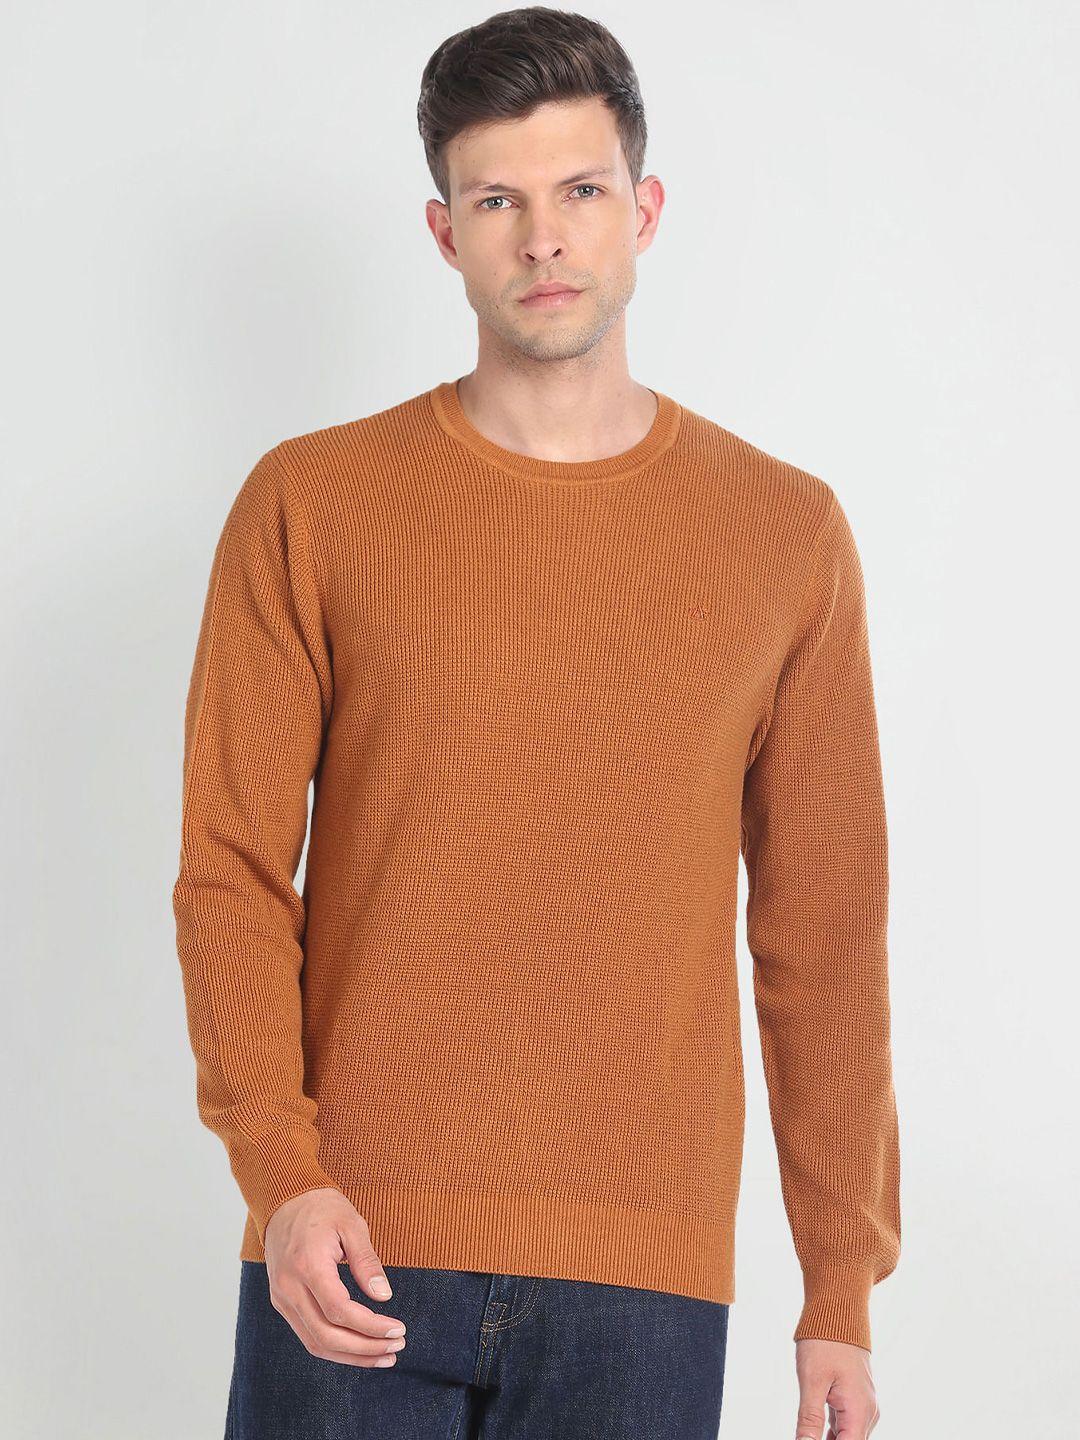 arrow-round-neck-long-sleeves-pullover-sweater